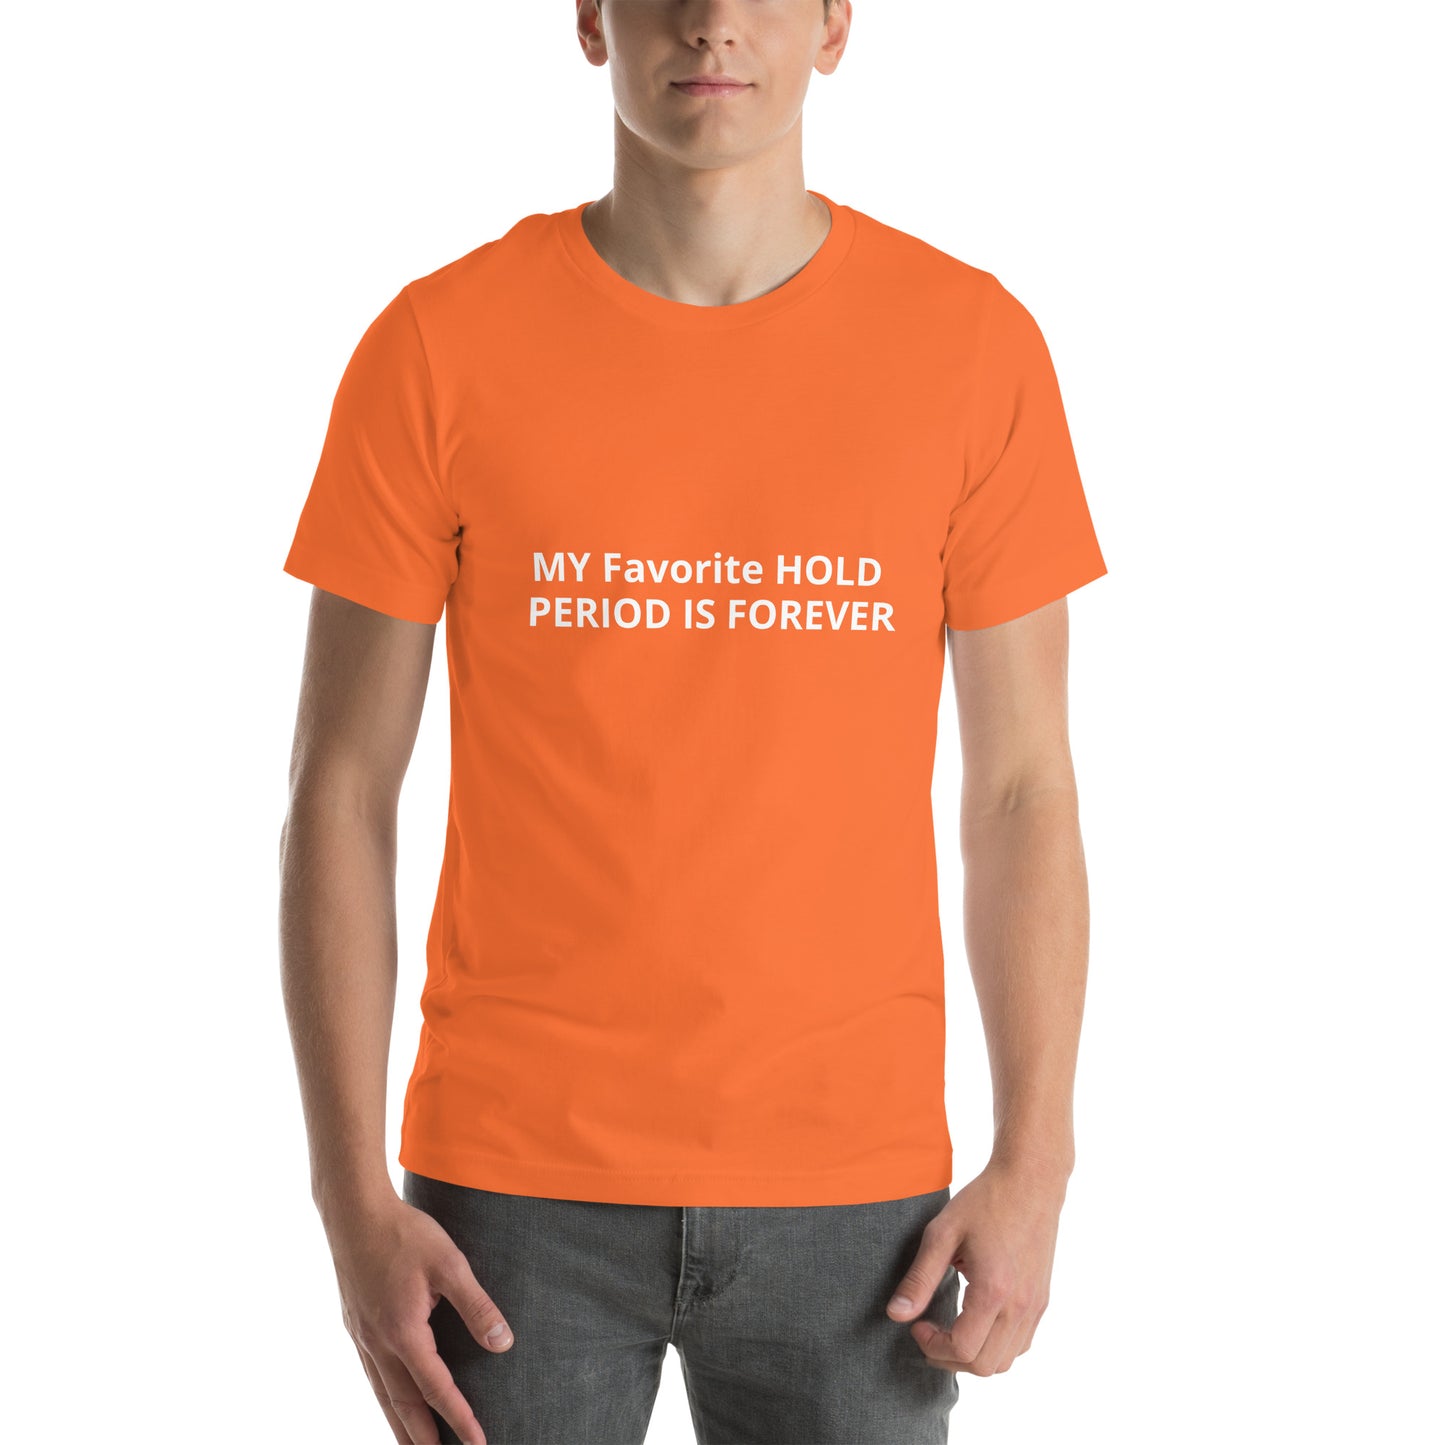 MY Favorite HOLD PERIOD IS FOREVER  Unisex t-shirt